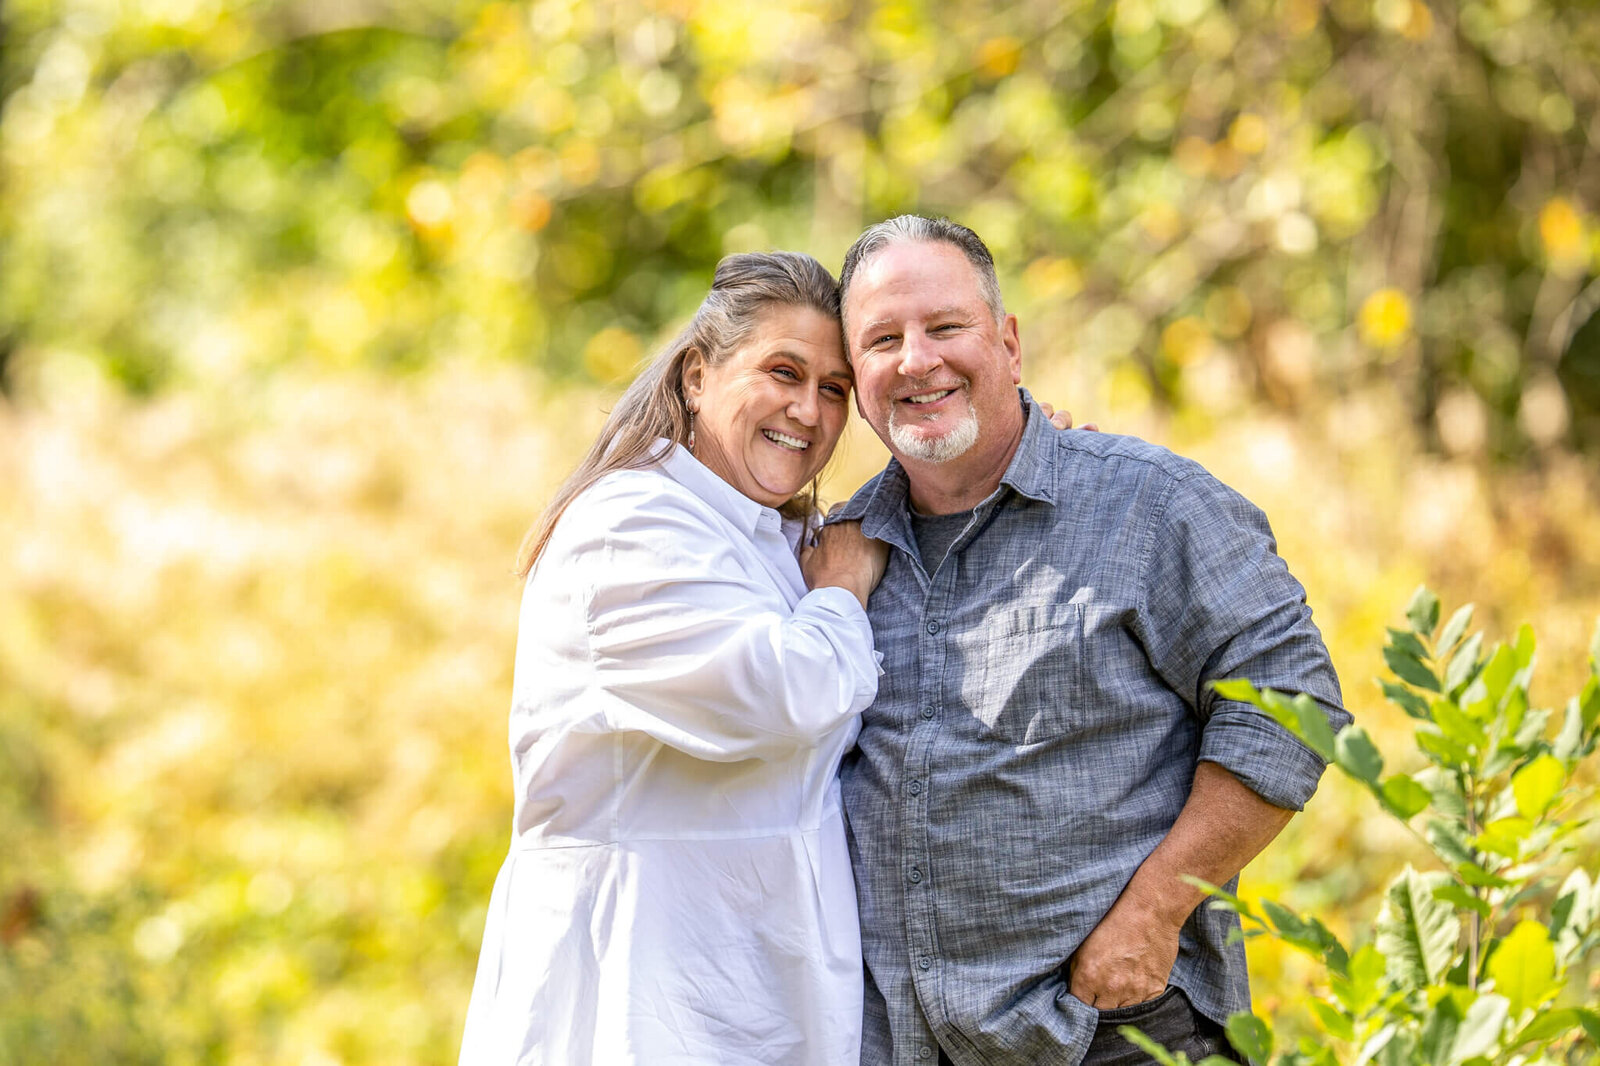 Adult couple of male and female leanign into one another during fall photoshoot smiling